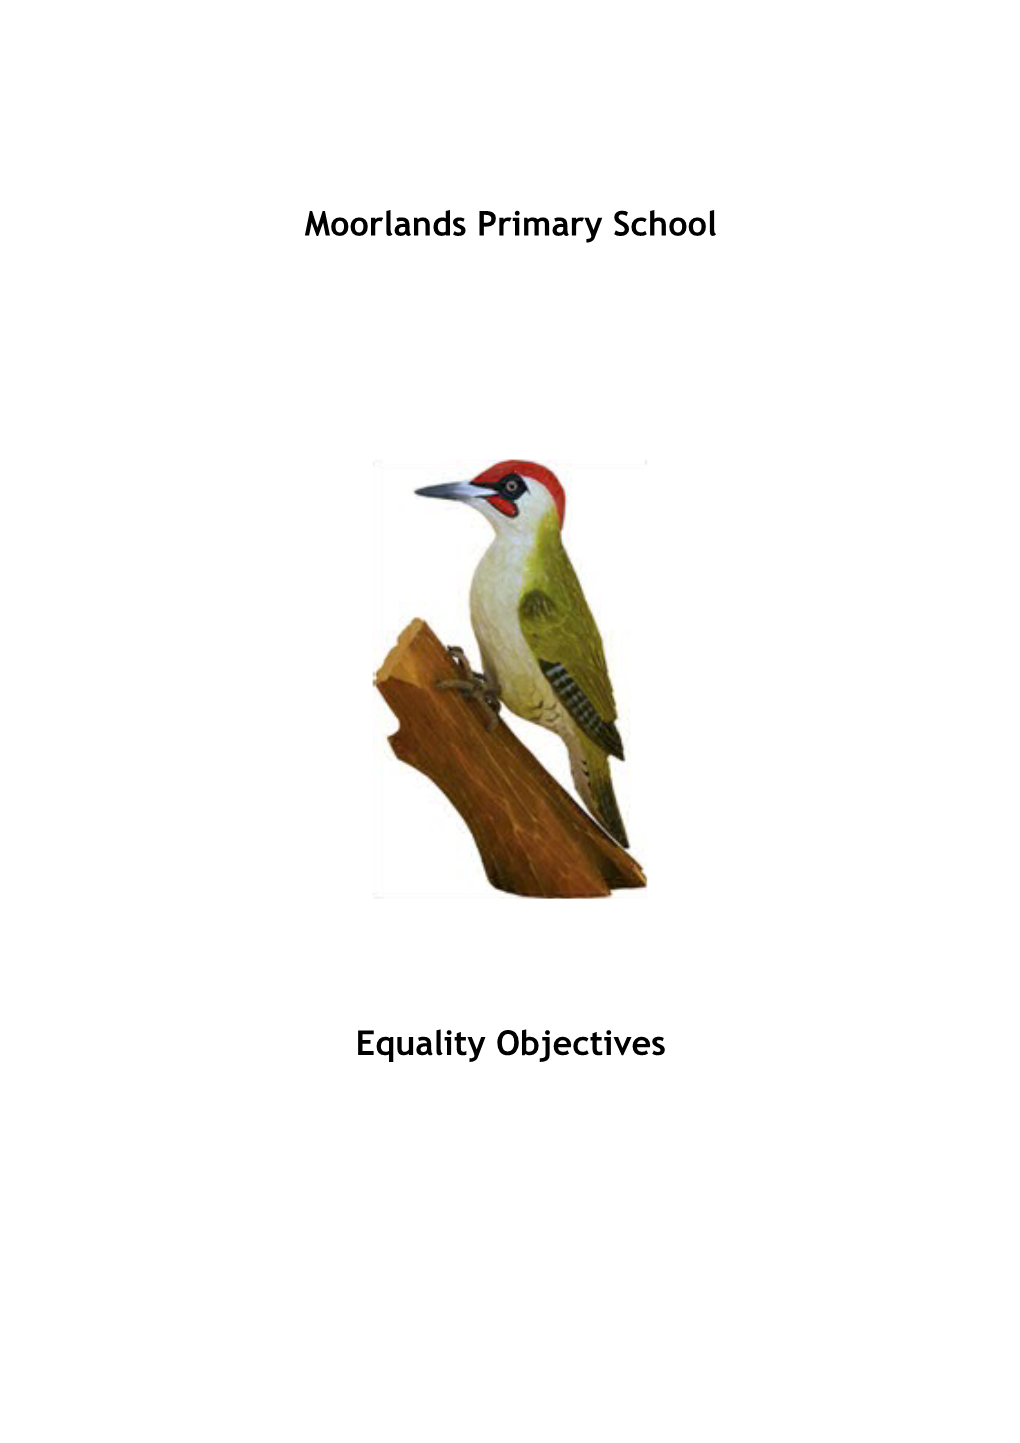 Our Equality Objectives